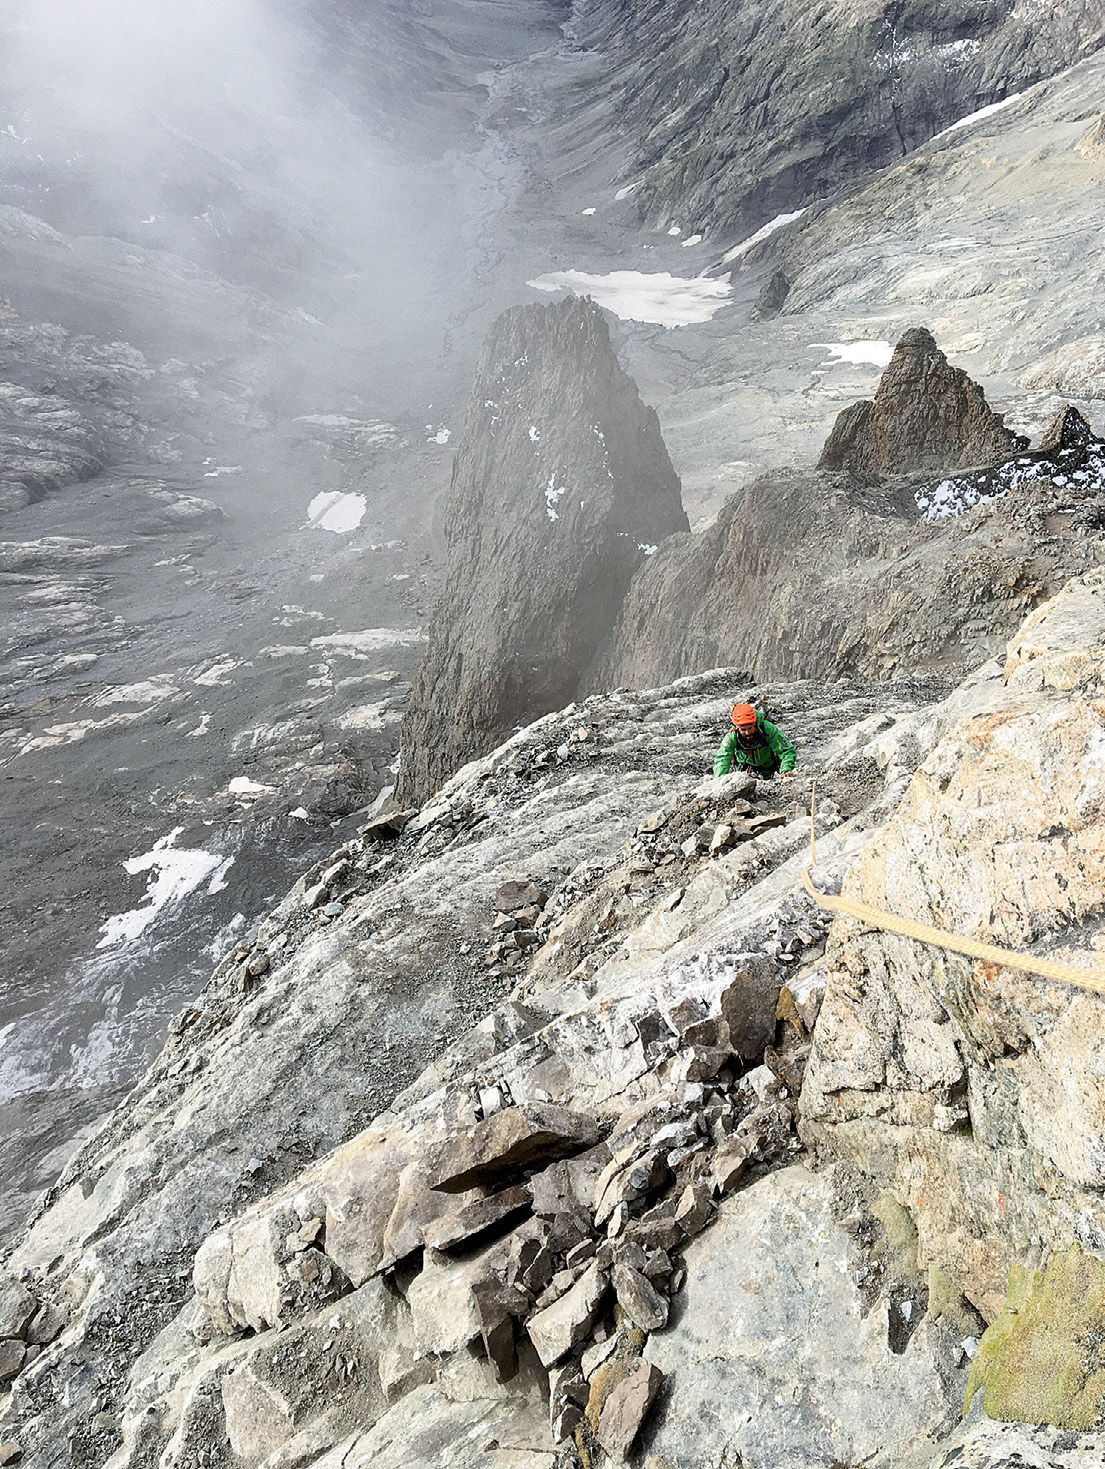 We’ve gone from a paradise of rock to hell, two guides from Alpe d’Huez recounted after climbing the Voie Normale in October 2018. They were the only team to have climbed the route in that year after the rockfall event of August 7. [Photo] Olivier Laborie